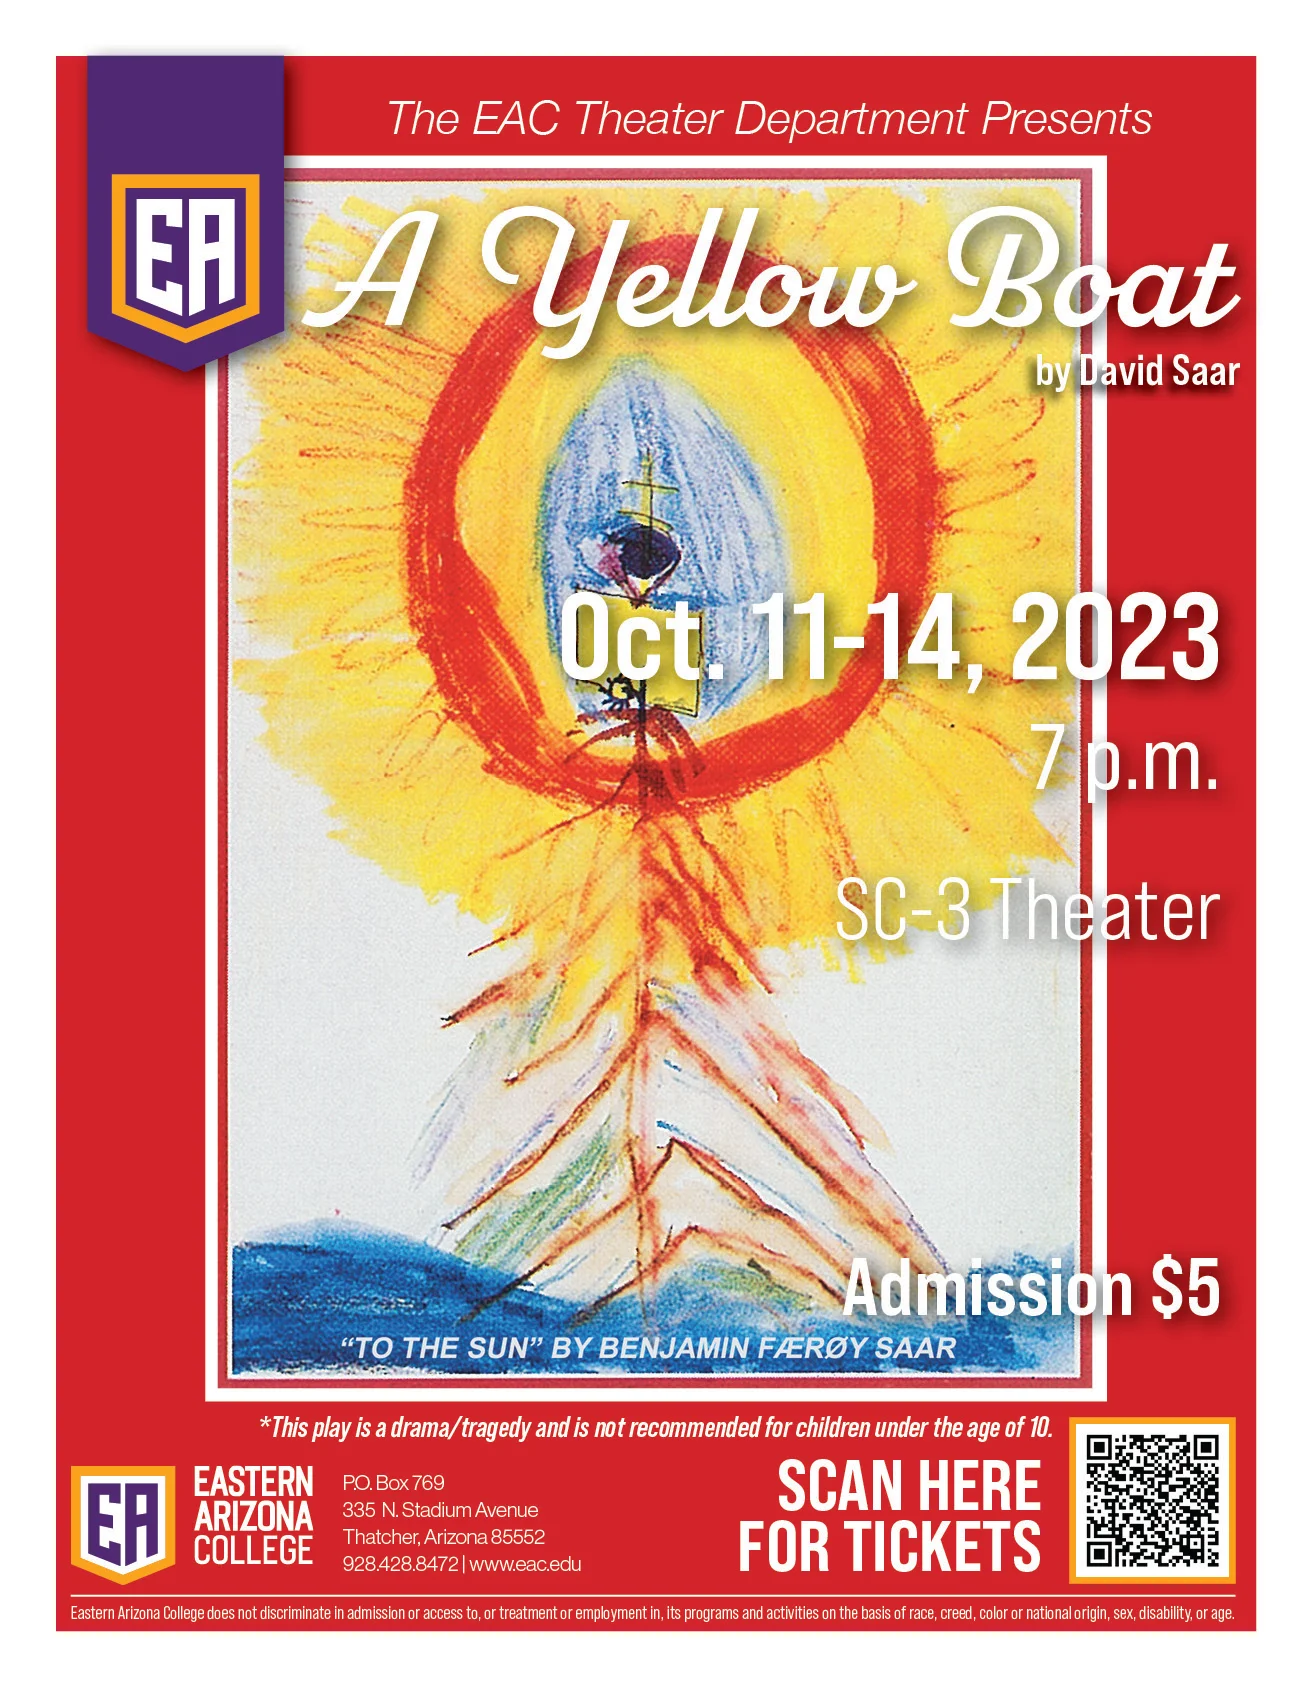 EAC presents A Yellow Boat